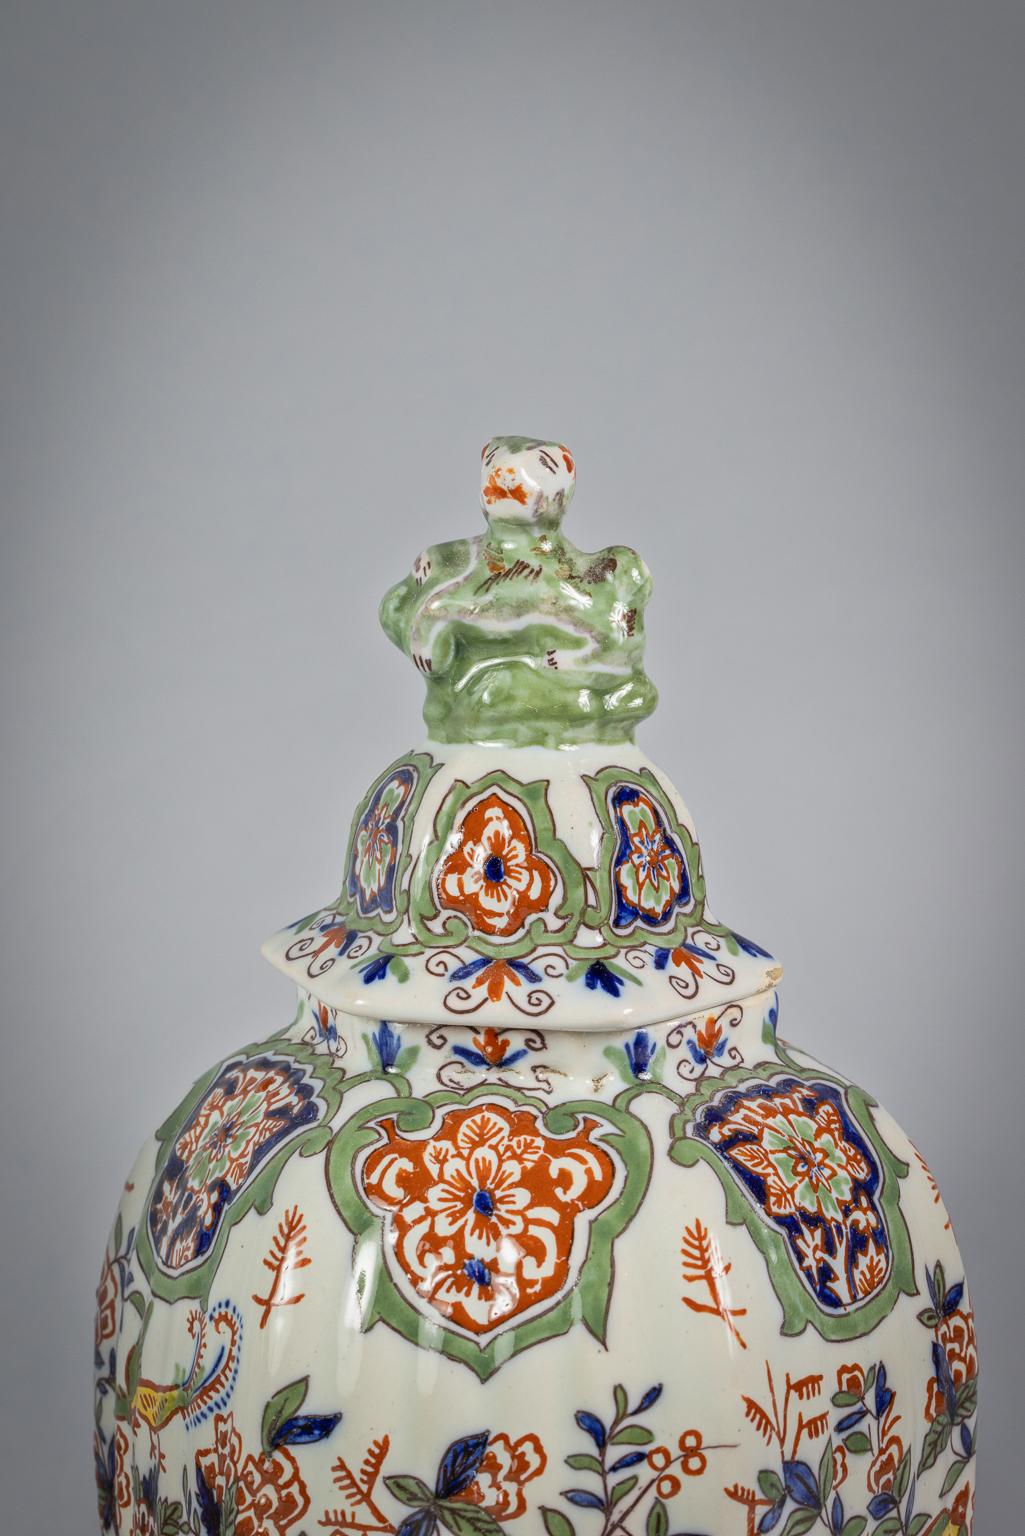 Each vase painted around the ribbed hexagonal exterior with birds amidst flowering oriental plants between floral cartouche borders, comprising: three ovoid vases and covers and two beaker vases, LF monogram marks painted in red.